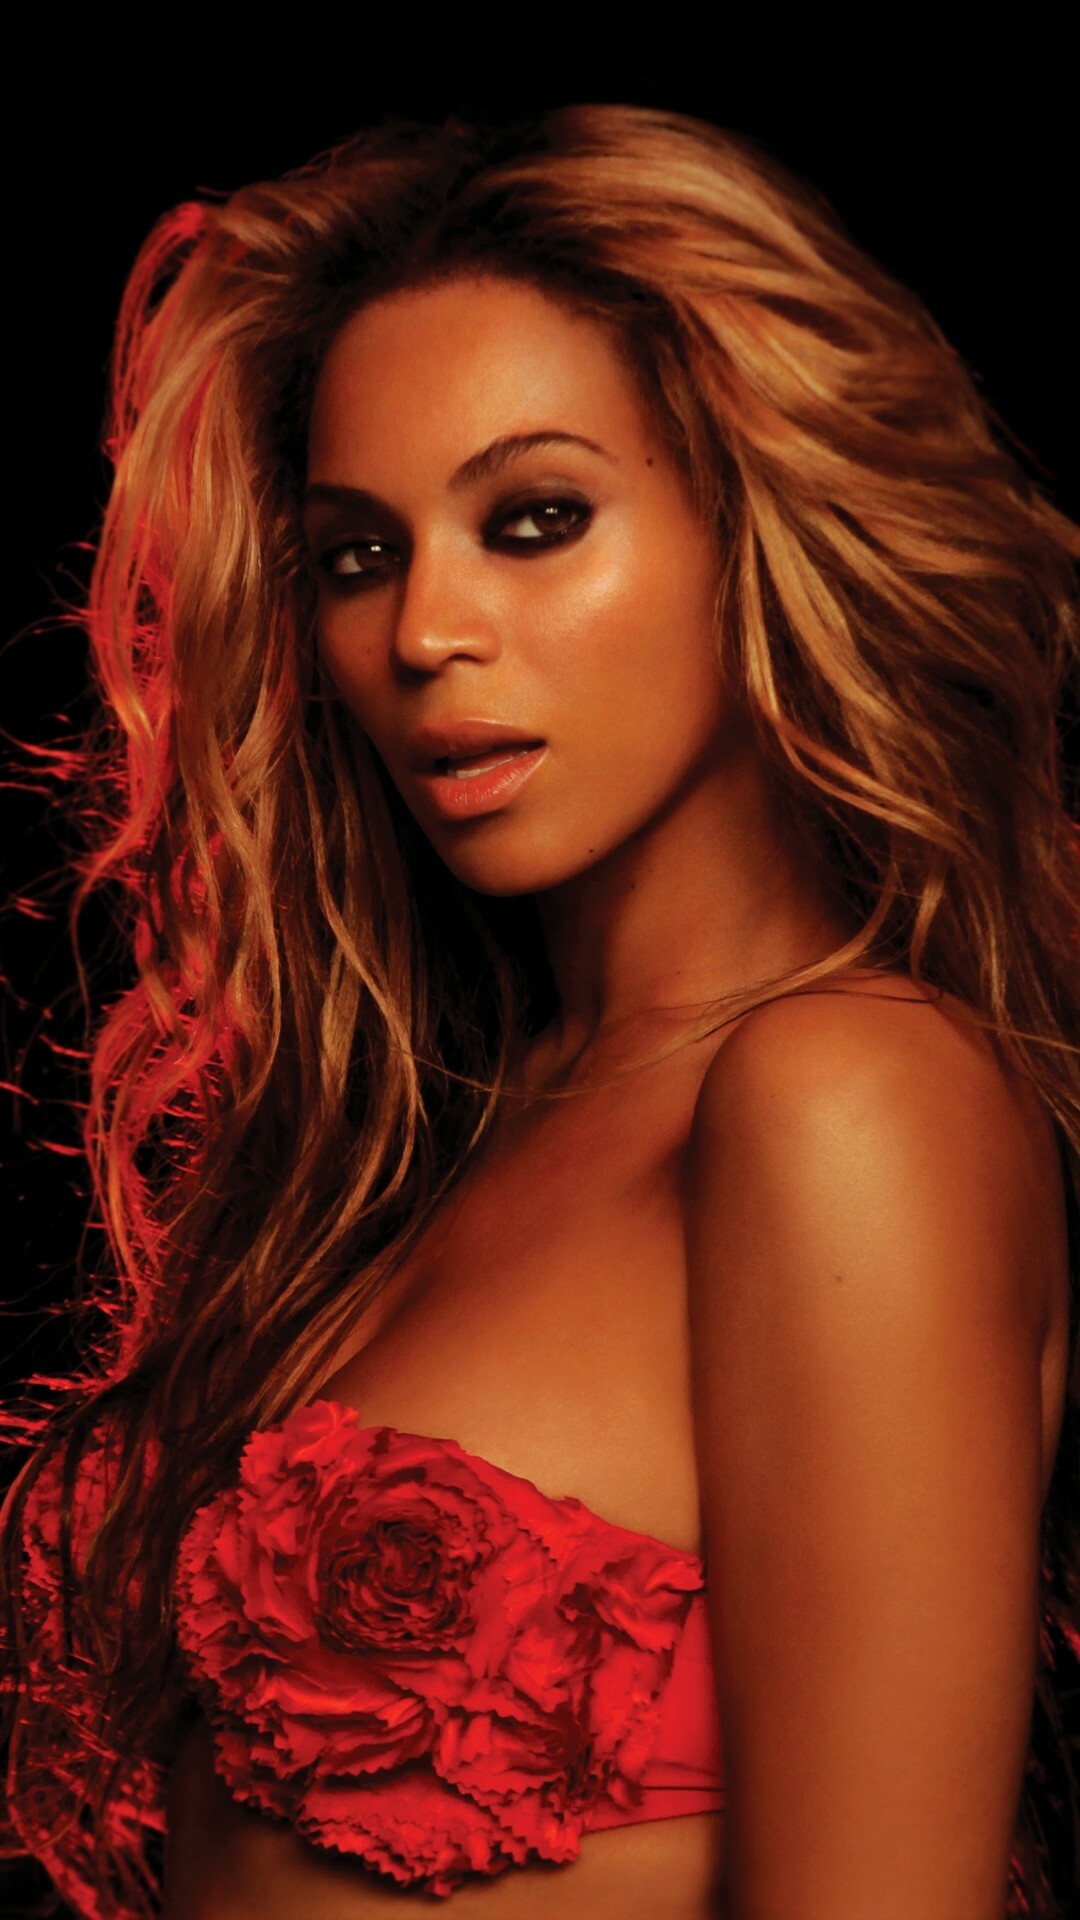 Beyonce: An American singer, songwriter, Ranked atop of Forbes'​ Celebrity 100, 2014. 1080x1920 Full HD Wallpaper.